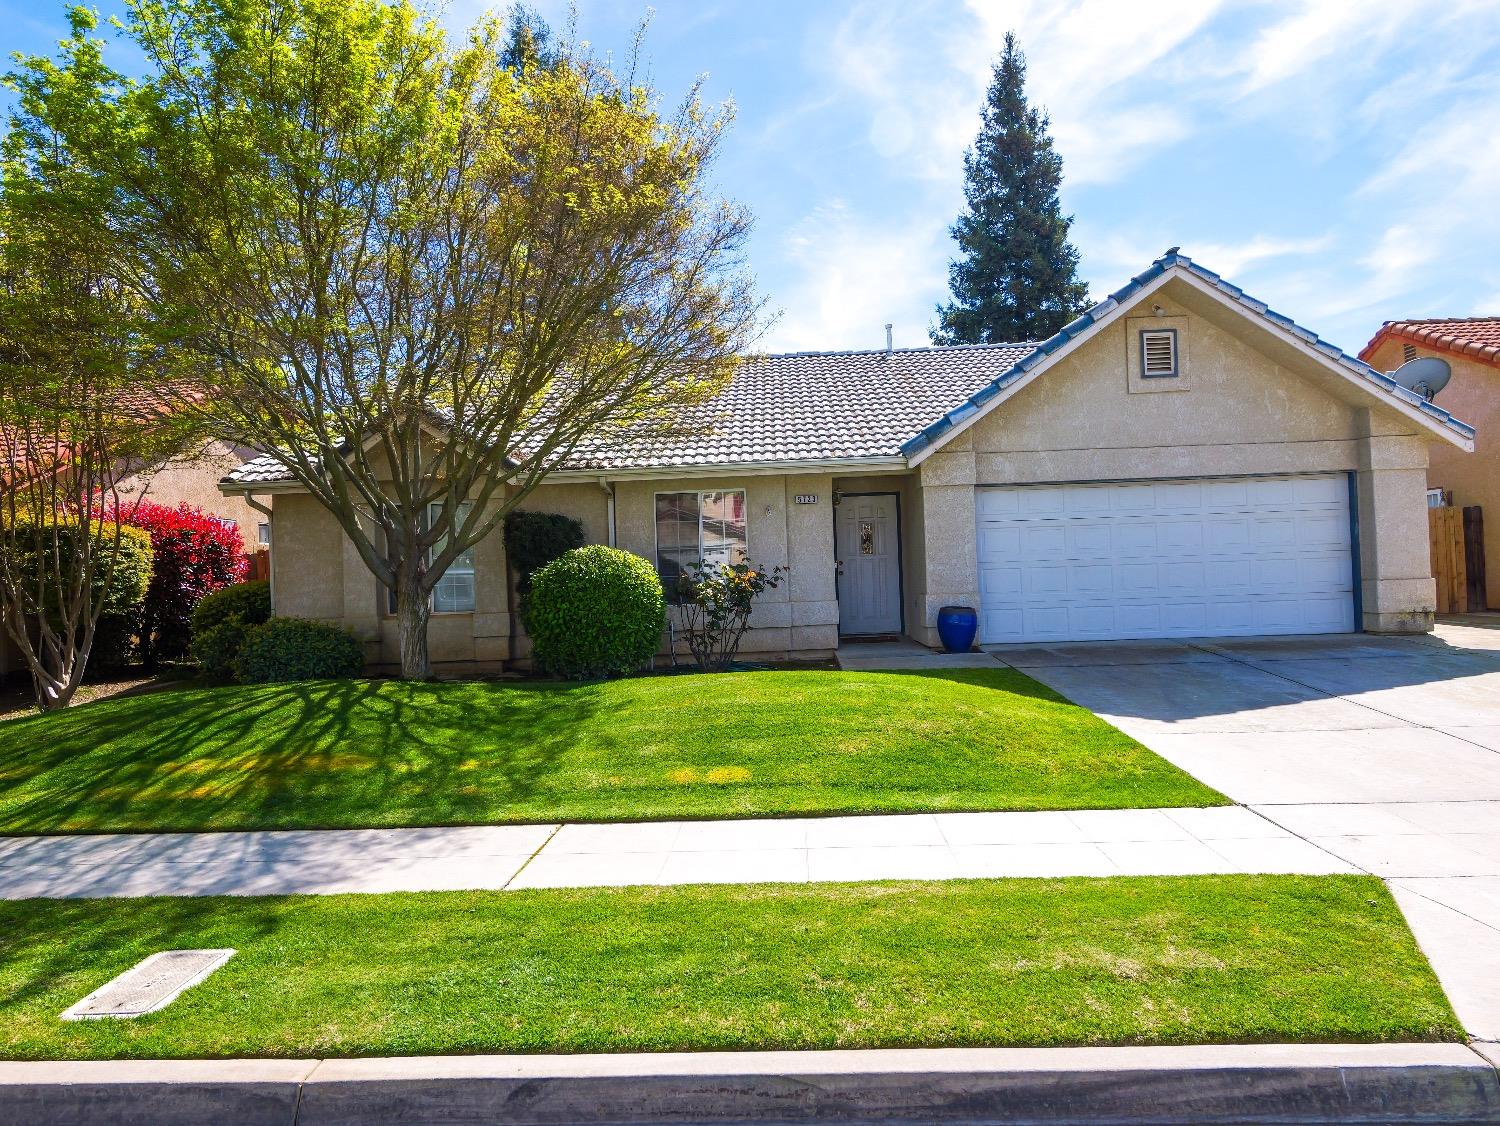 Photo of 5723 W Magill Ave in Fresno, CA